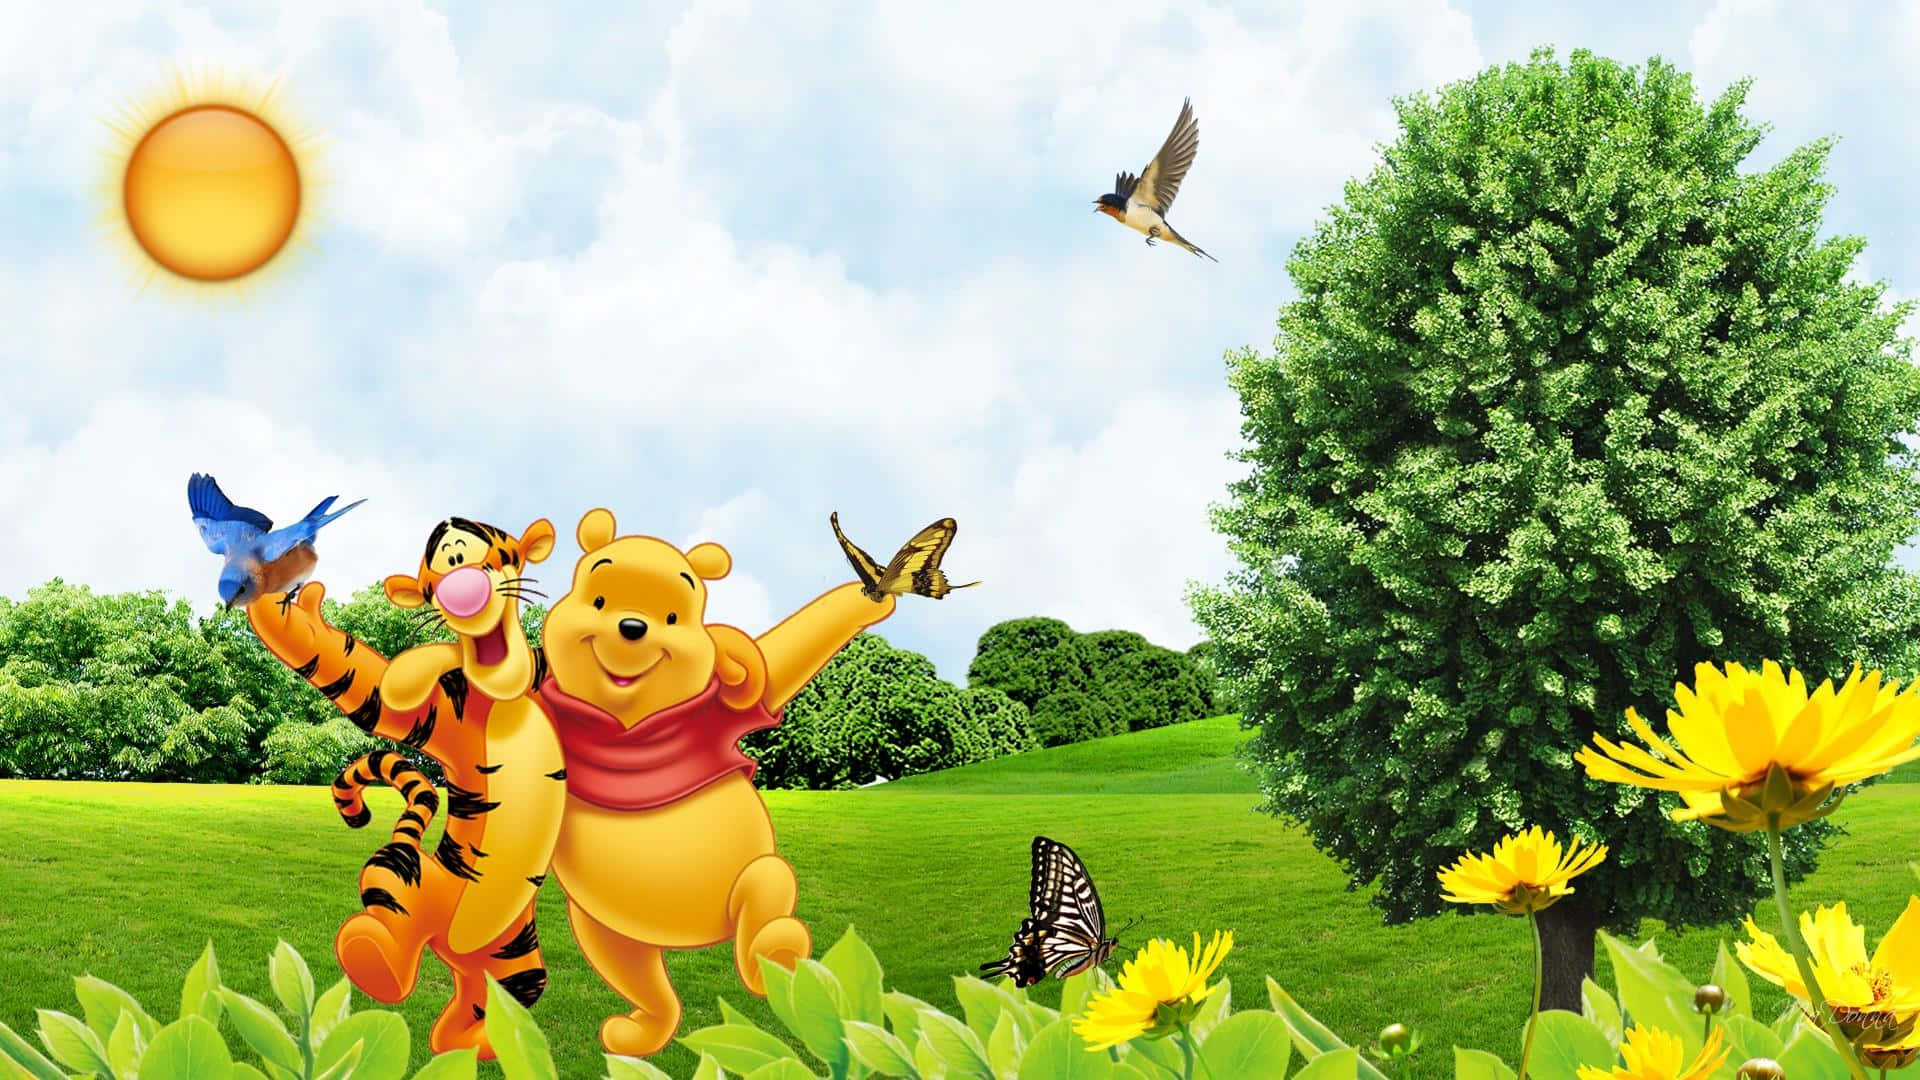 winnie the pooh and tiger in the grass